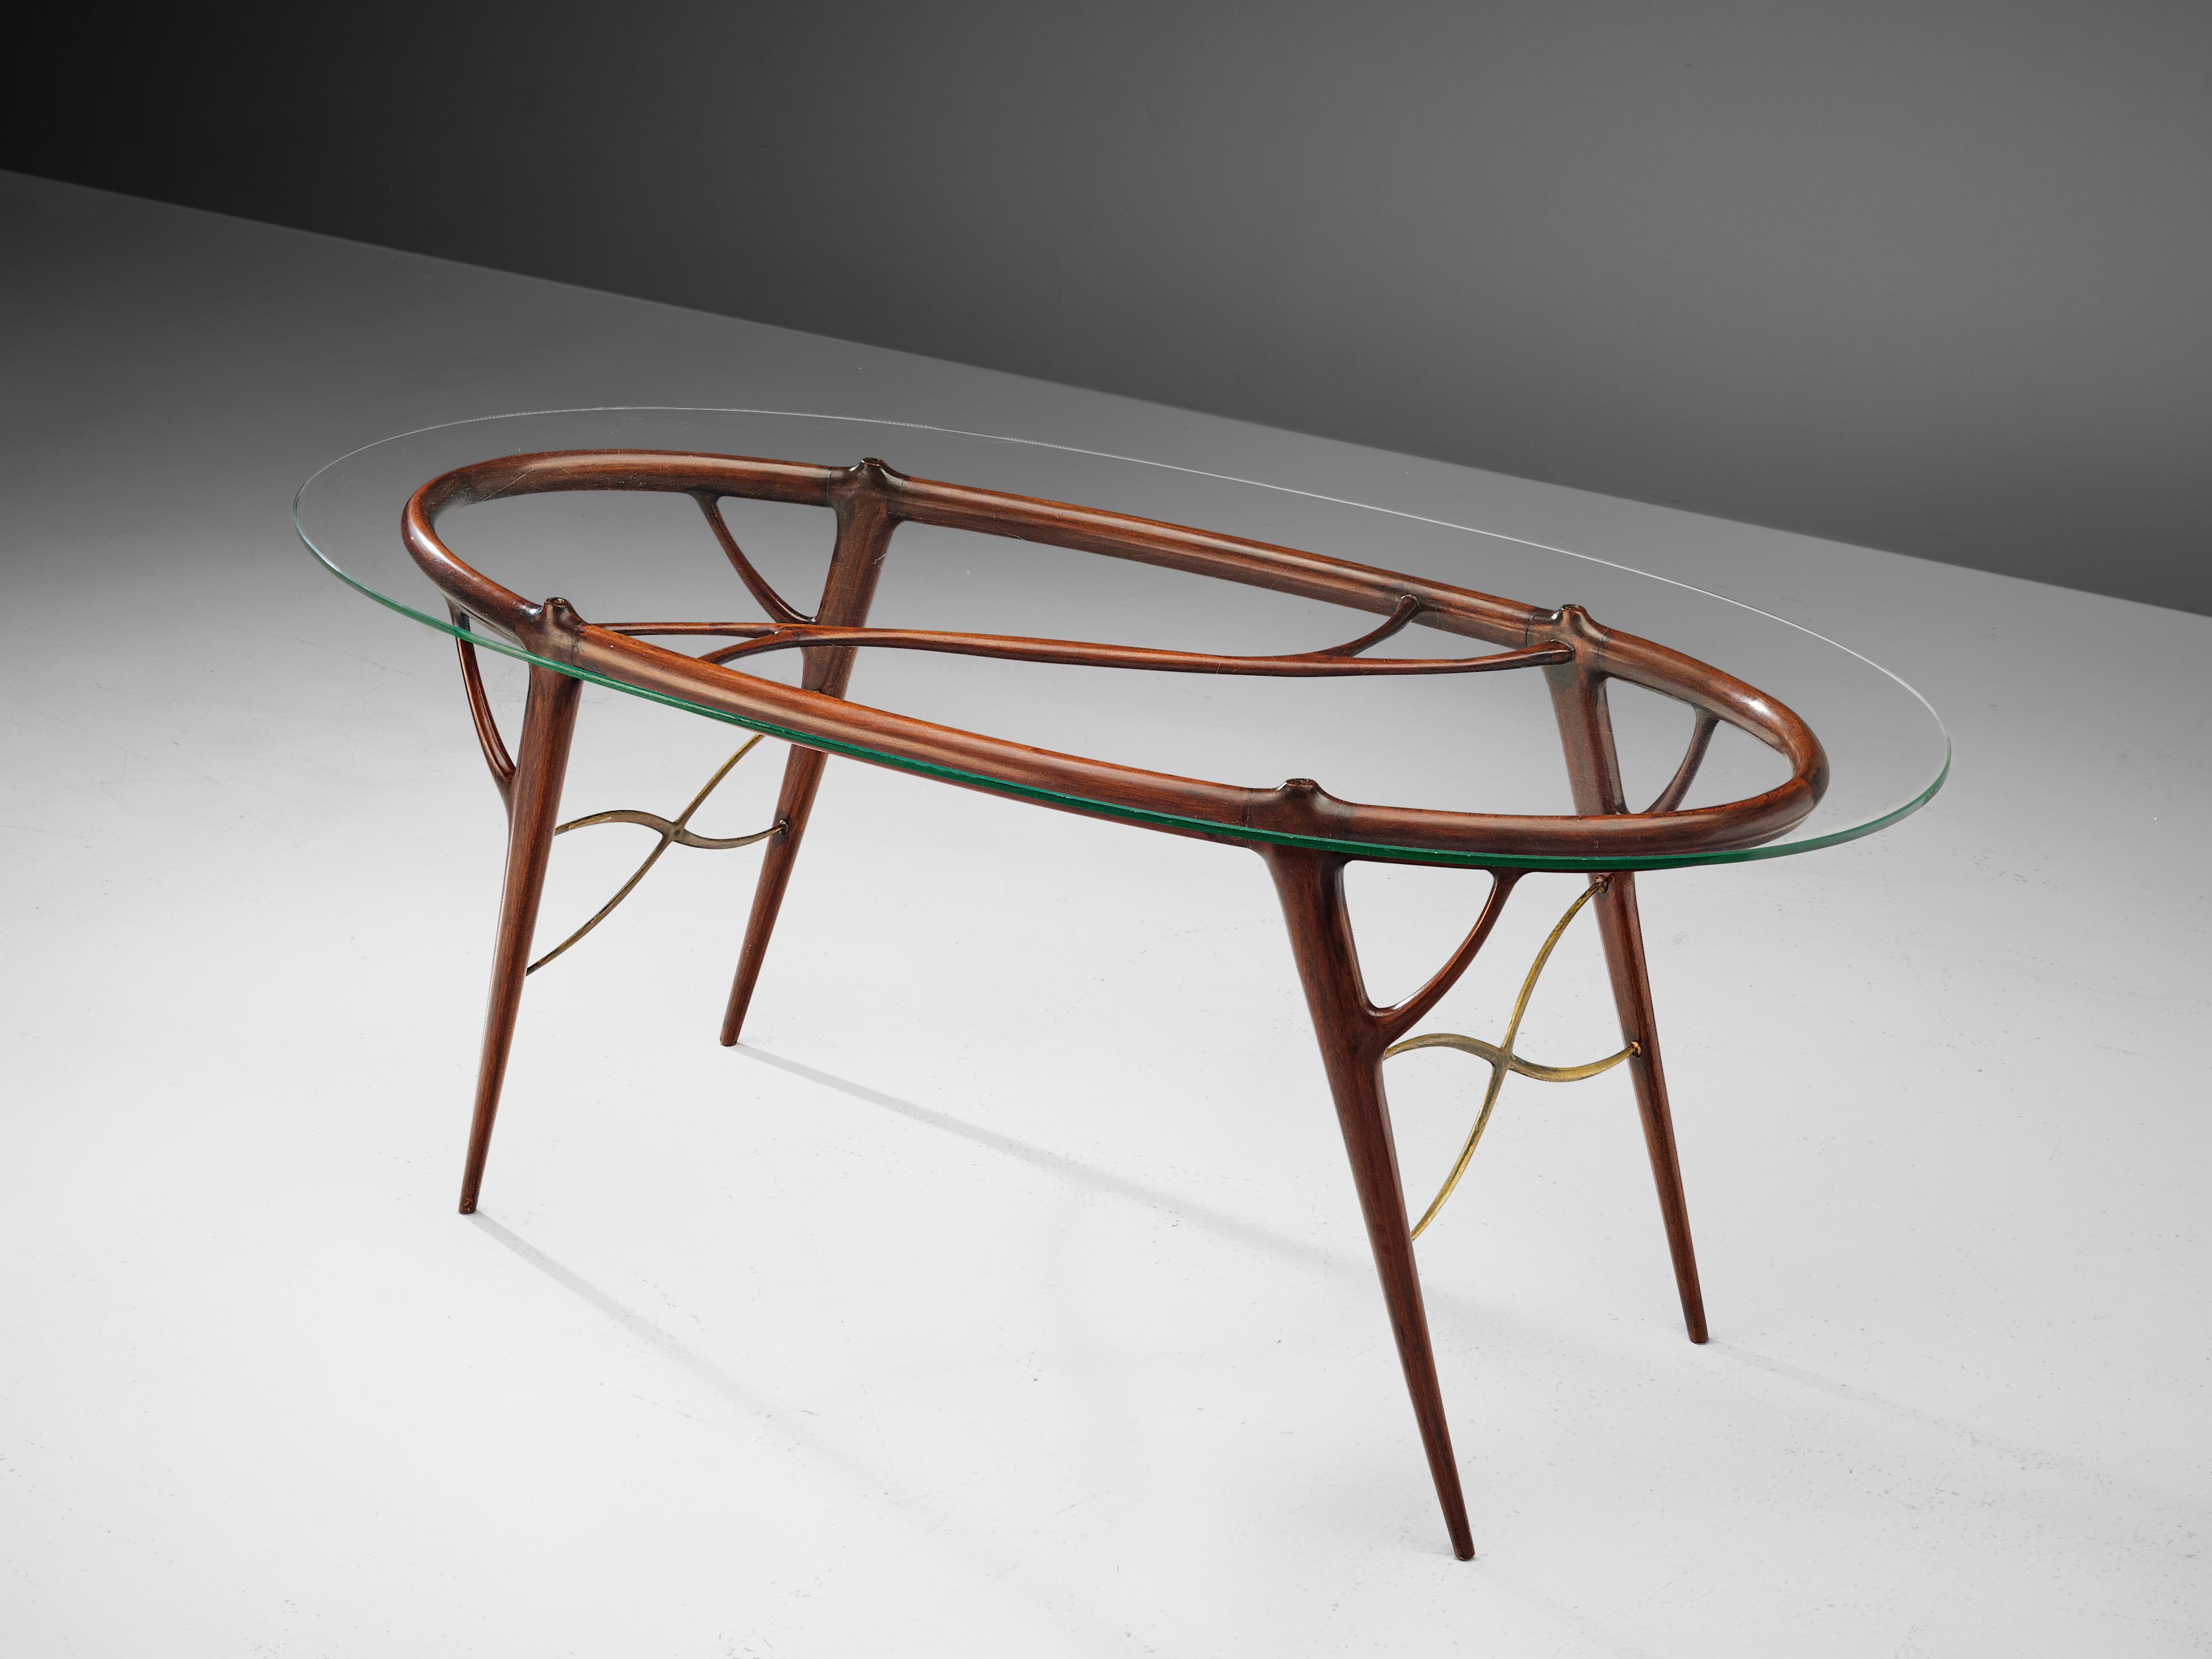 Dining table, mahogany, brass, glass, Italy, 1950s

This highly elegant dining table with oval glass table top strongly reminds of the creations of the Italian designer Silvio Cavatorta. The delicate frame in mahogany consists of organic, branche